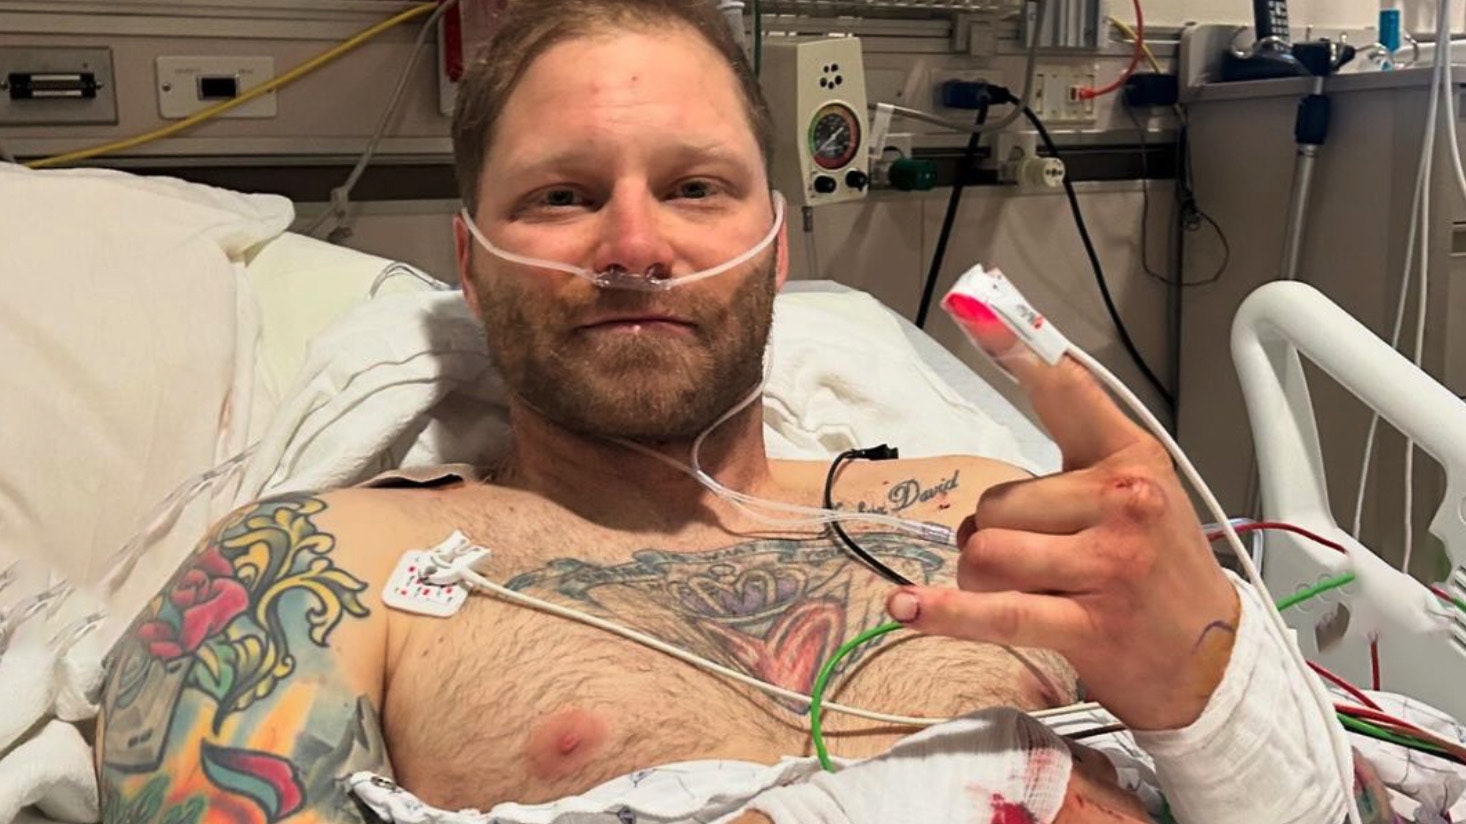 Shayne Patrick Burke, a 35-year-old military veteran from Massachusetts, says he's lucky to survive an attack by an angry momma grizzly in Wyoming's Grand Teton National Park. In an Instagram post detailing the attack, he says it was the most violent experience of his life and he has no ill feelings toward the bear.